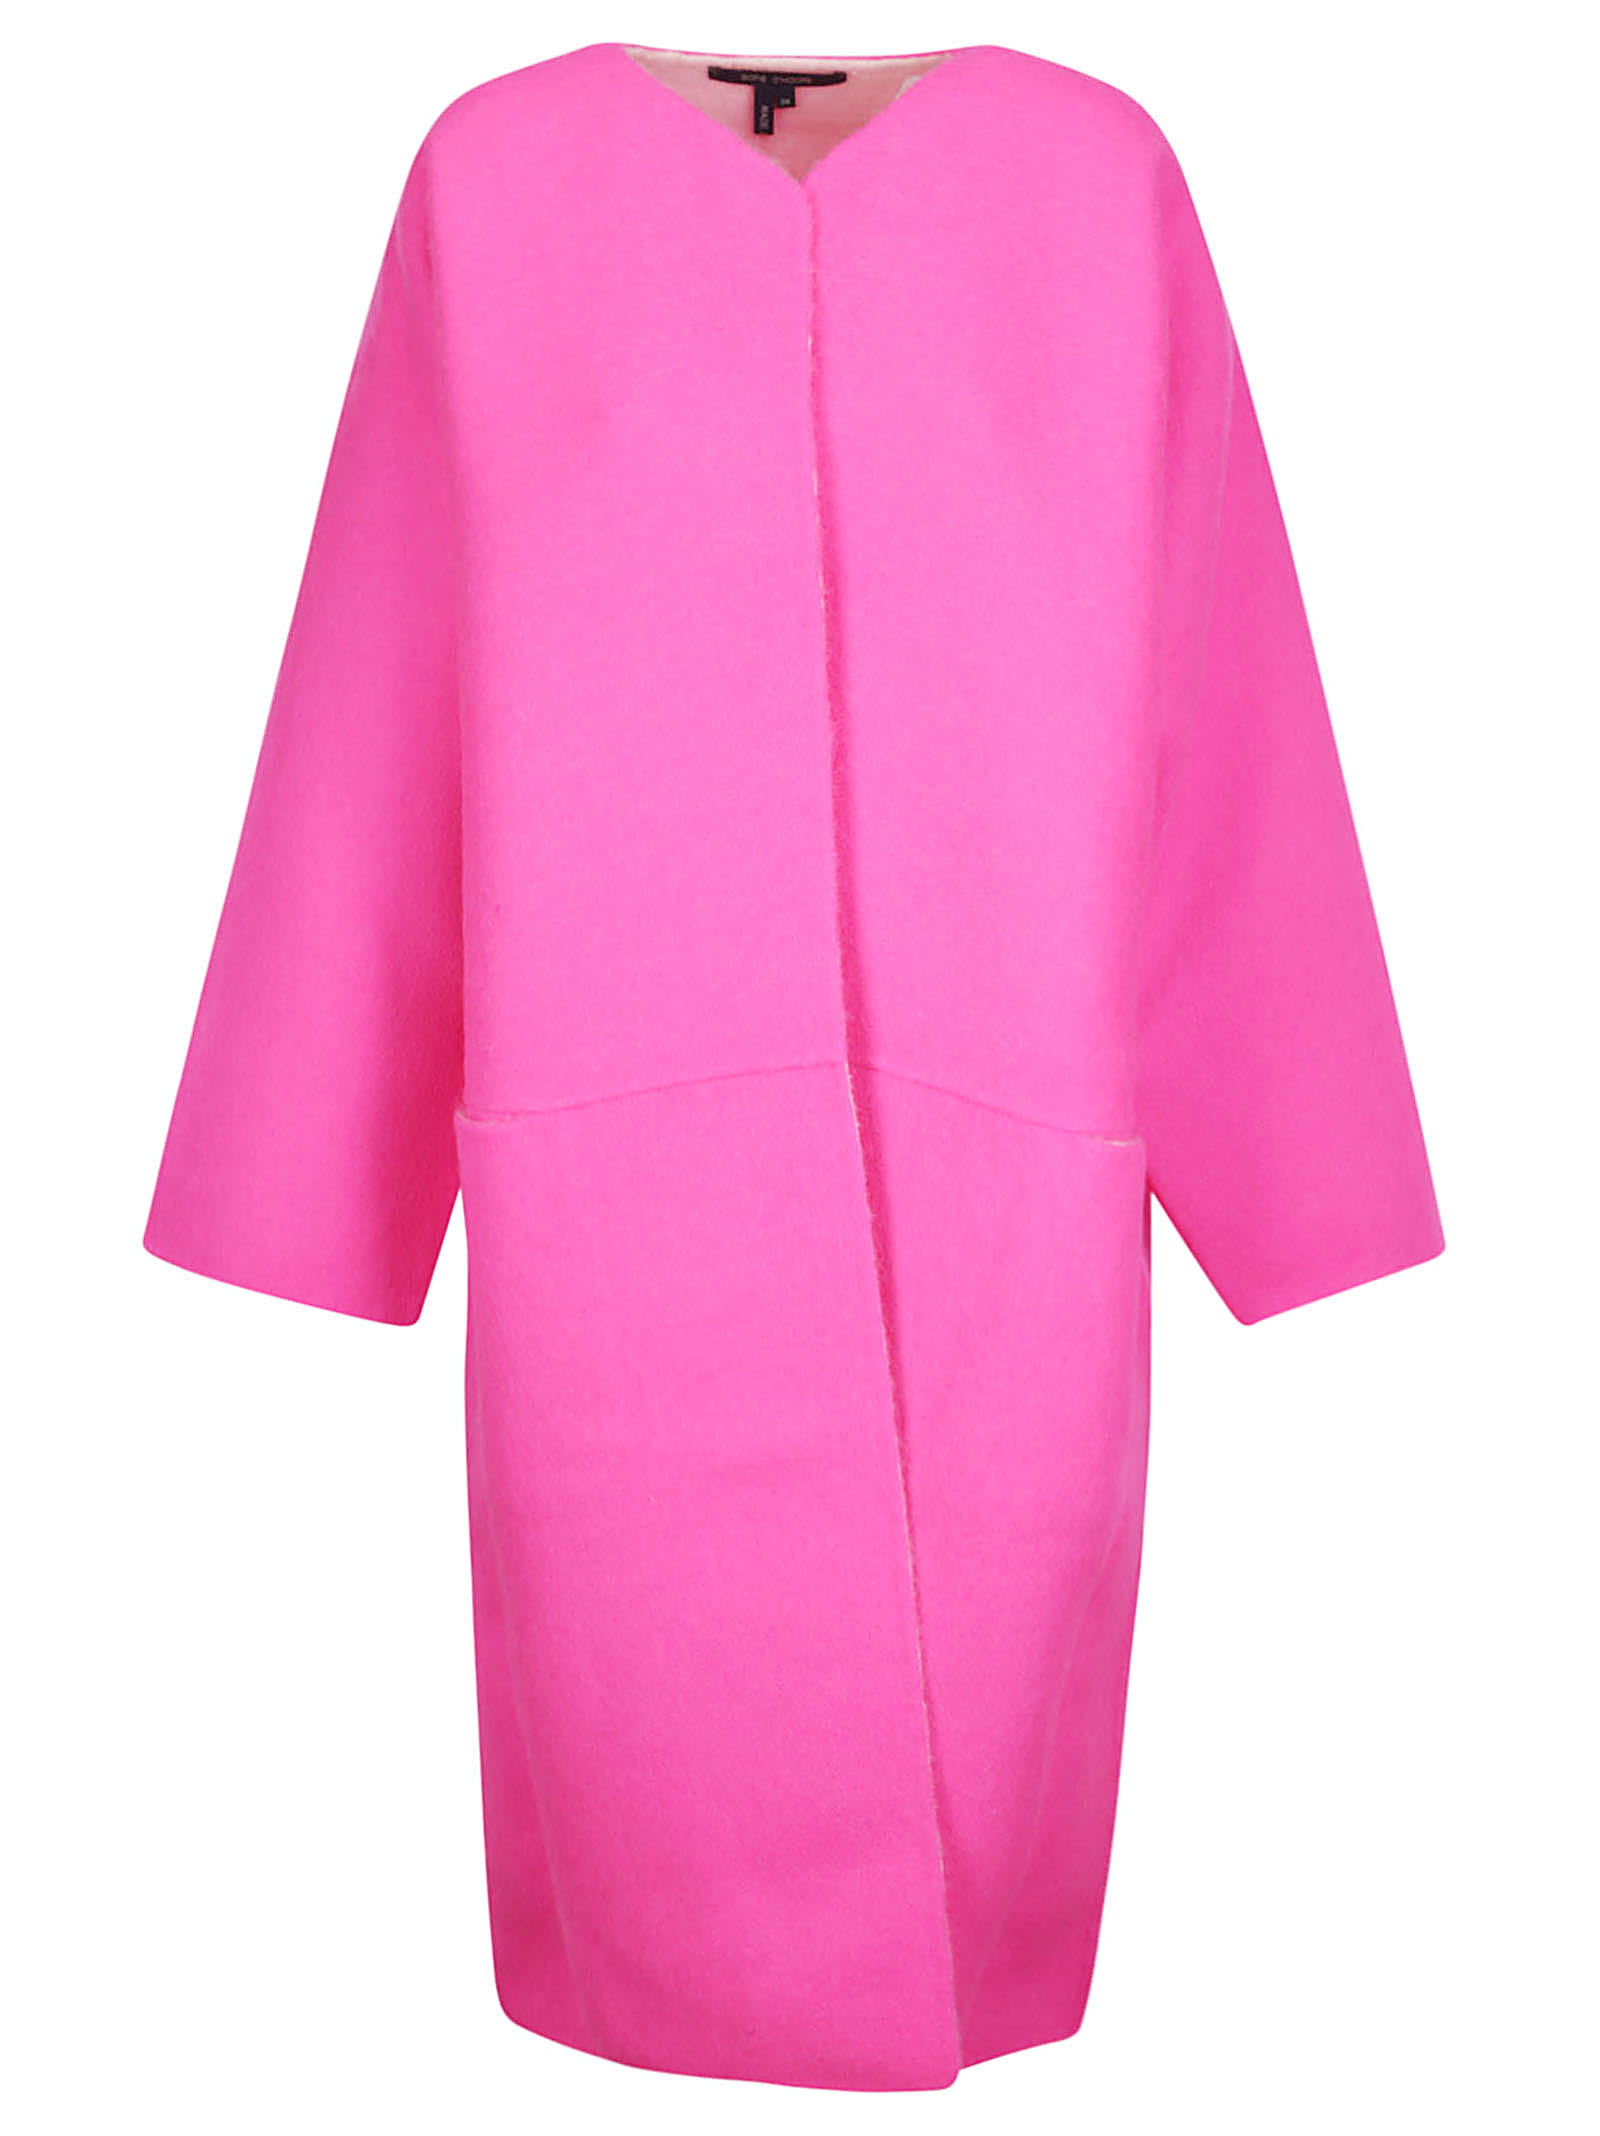 SOFIE D'HOORE DF COAT WITH SLIT FRONT POCKETS-WOVEN FUCHSIA/ SNO